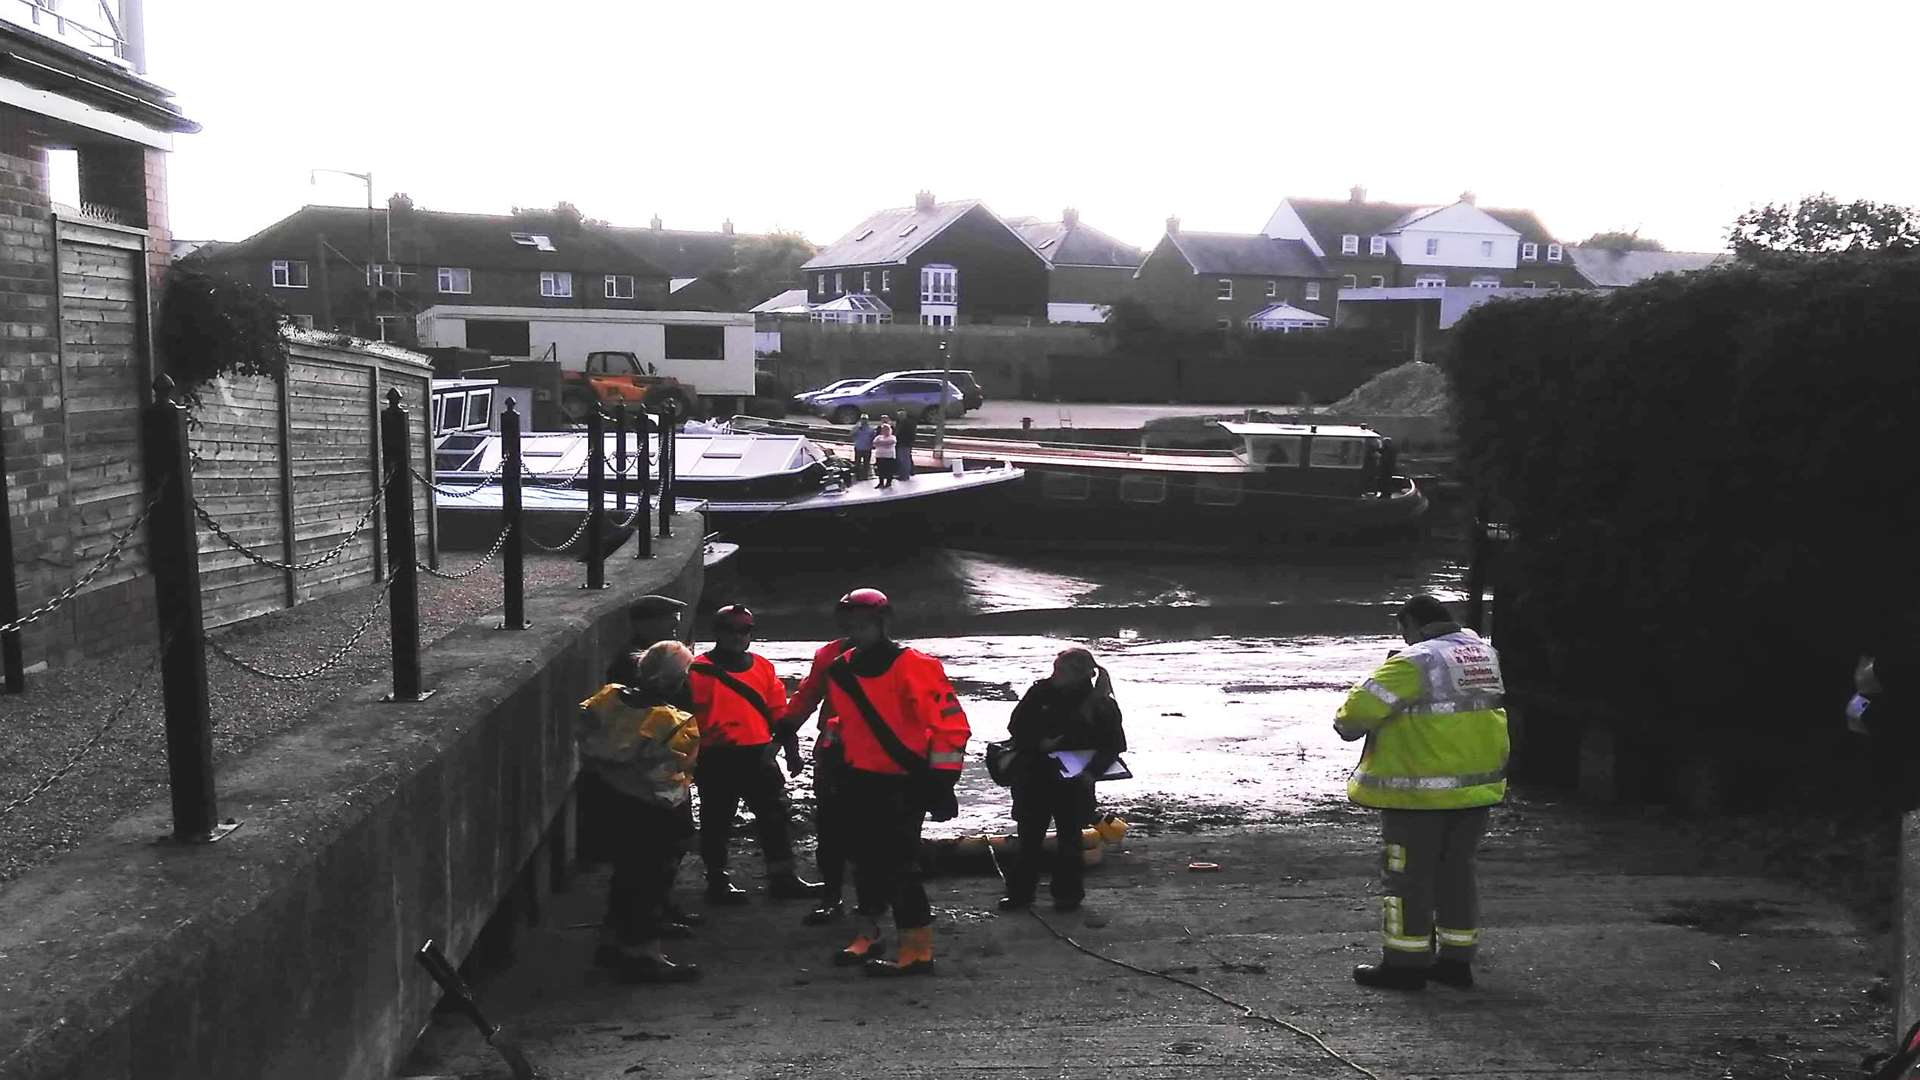 Fire crews rescued the man from the mud. Picture: Michael Maloney.